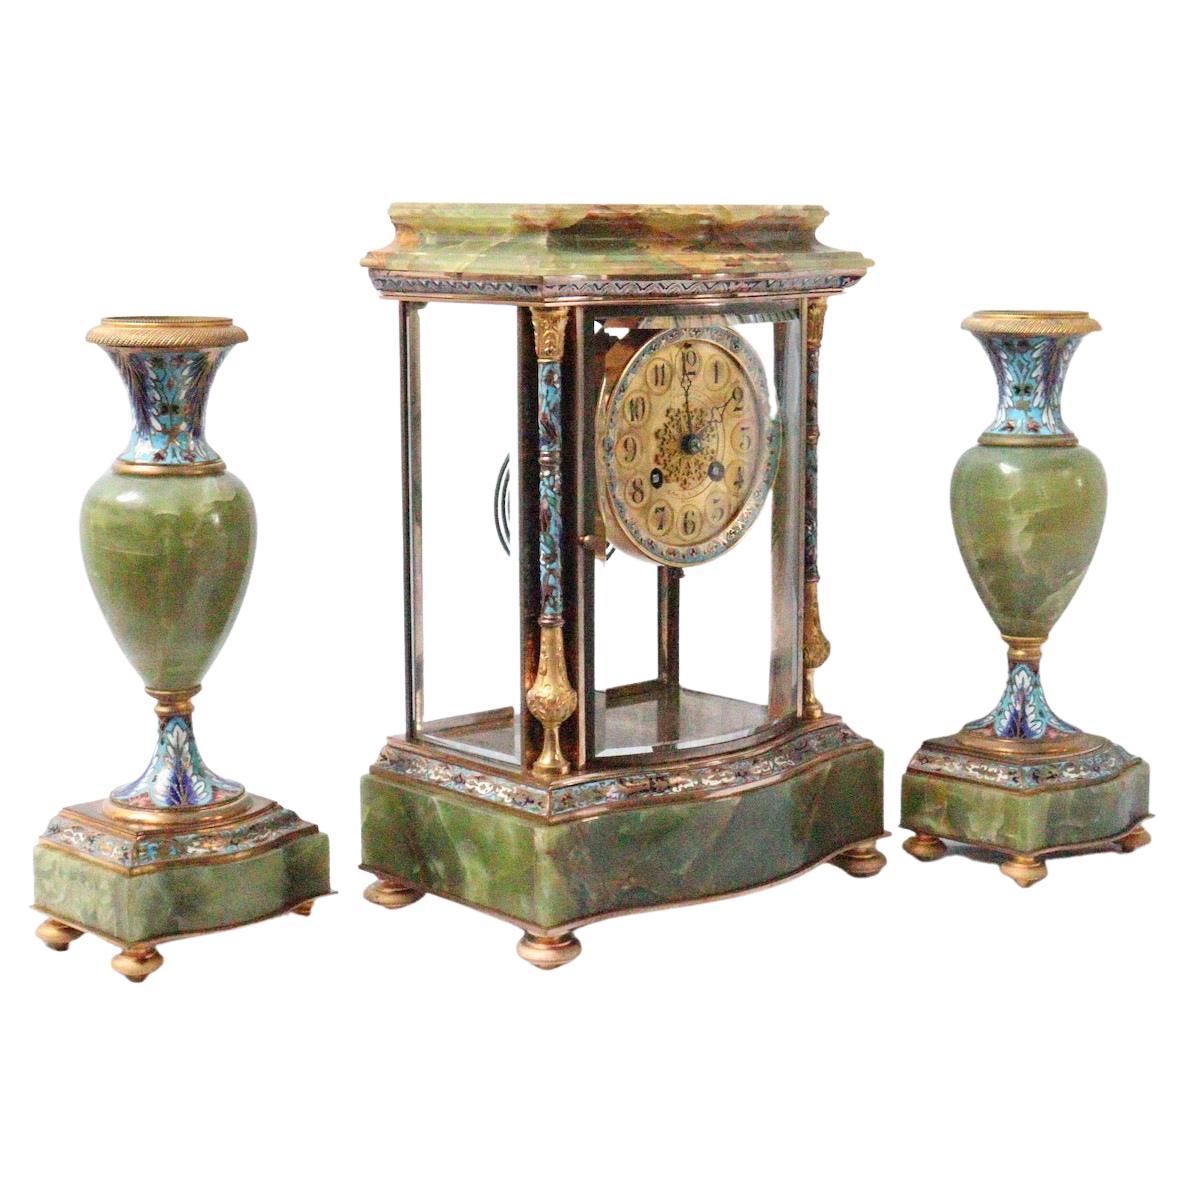 19th Century French Onyx and Champlevé Enamel Three-Pieces Clock Garniture